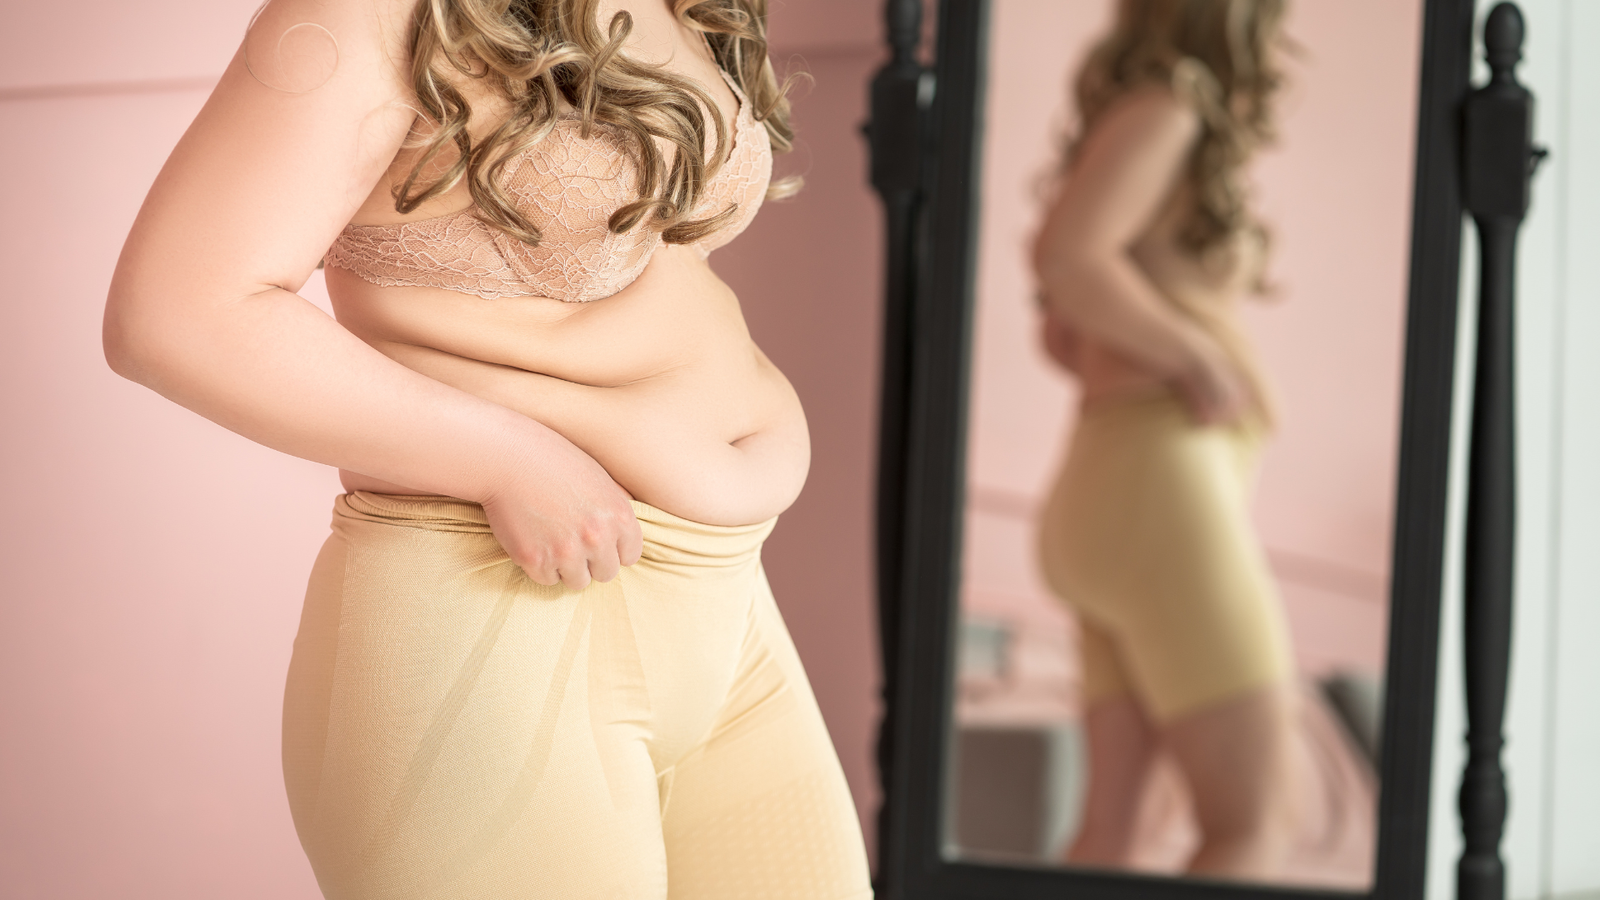 WHAT WOMEN NEED TO KNOW ABOUT LOSING BODY FAT